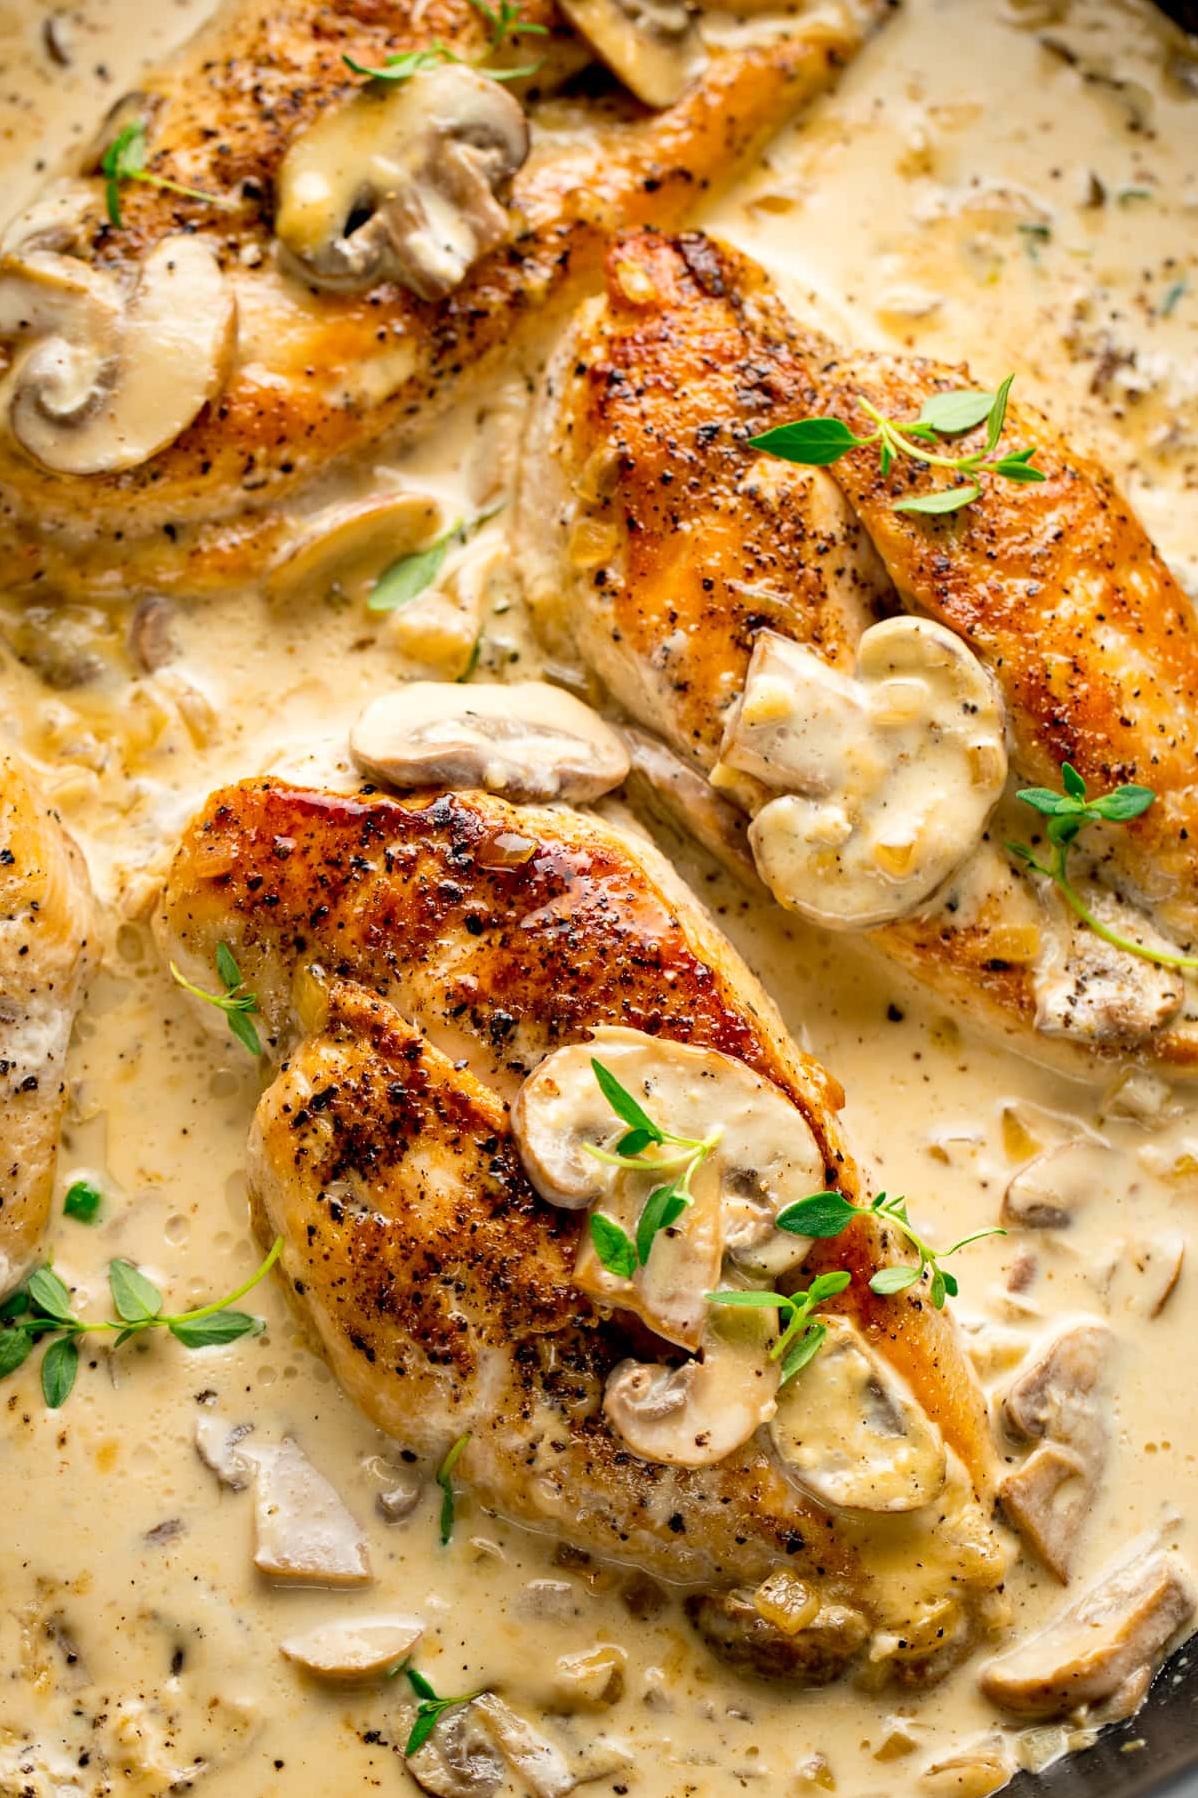  A perfect night in calls for this succulent chicken and mushroom dish